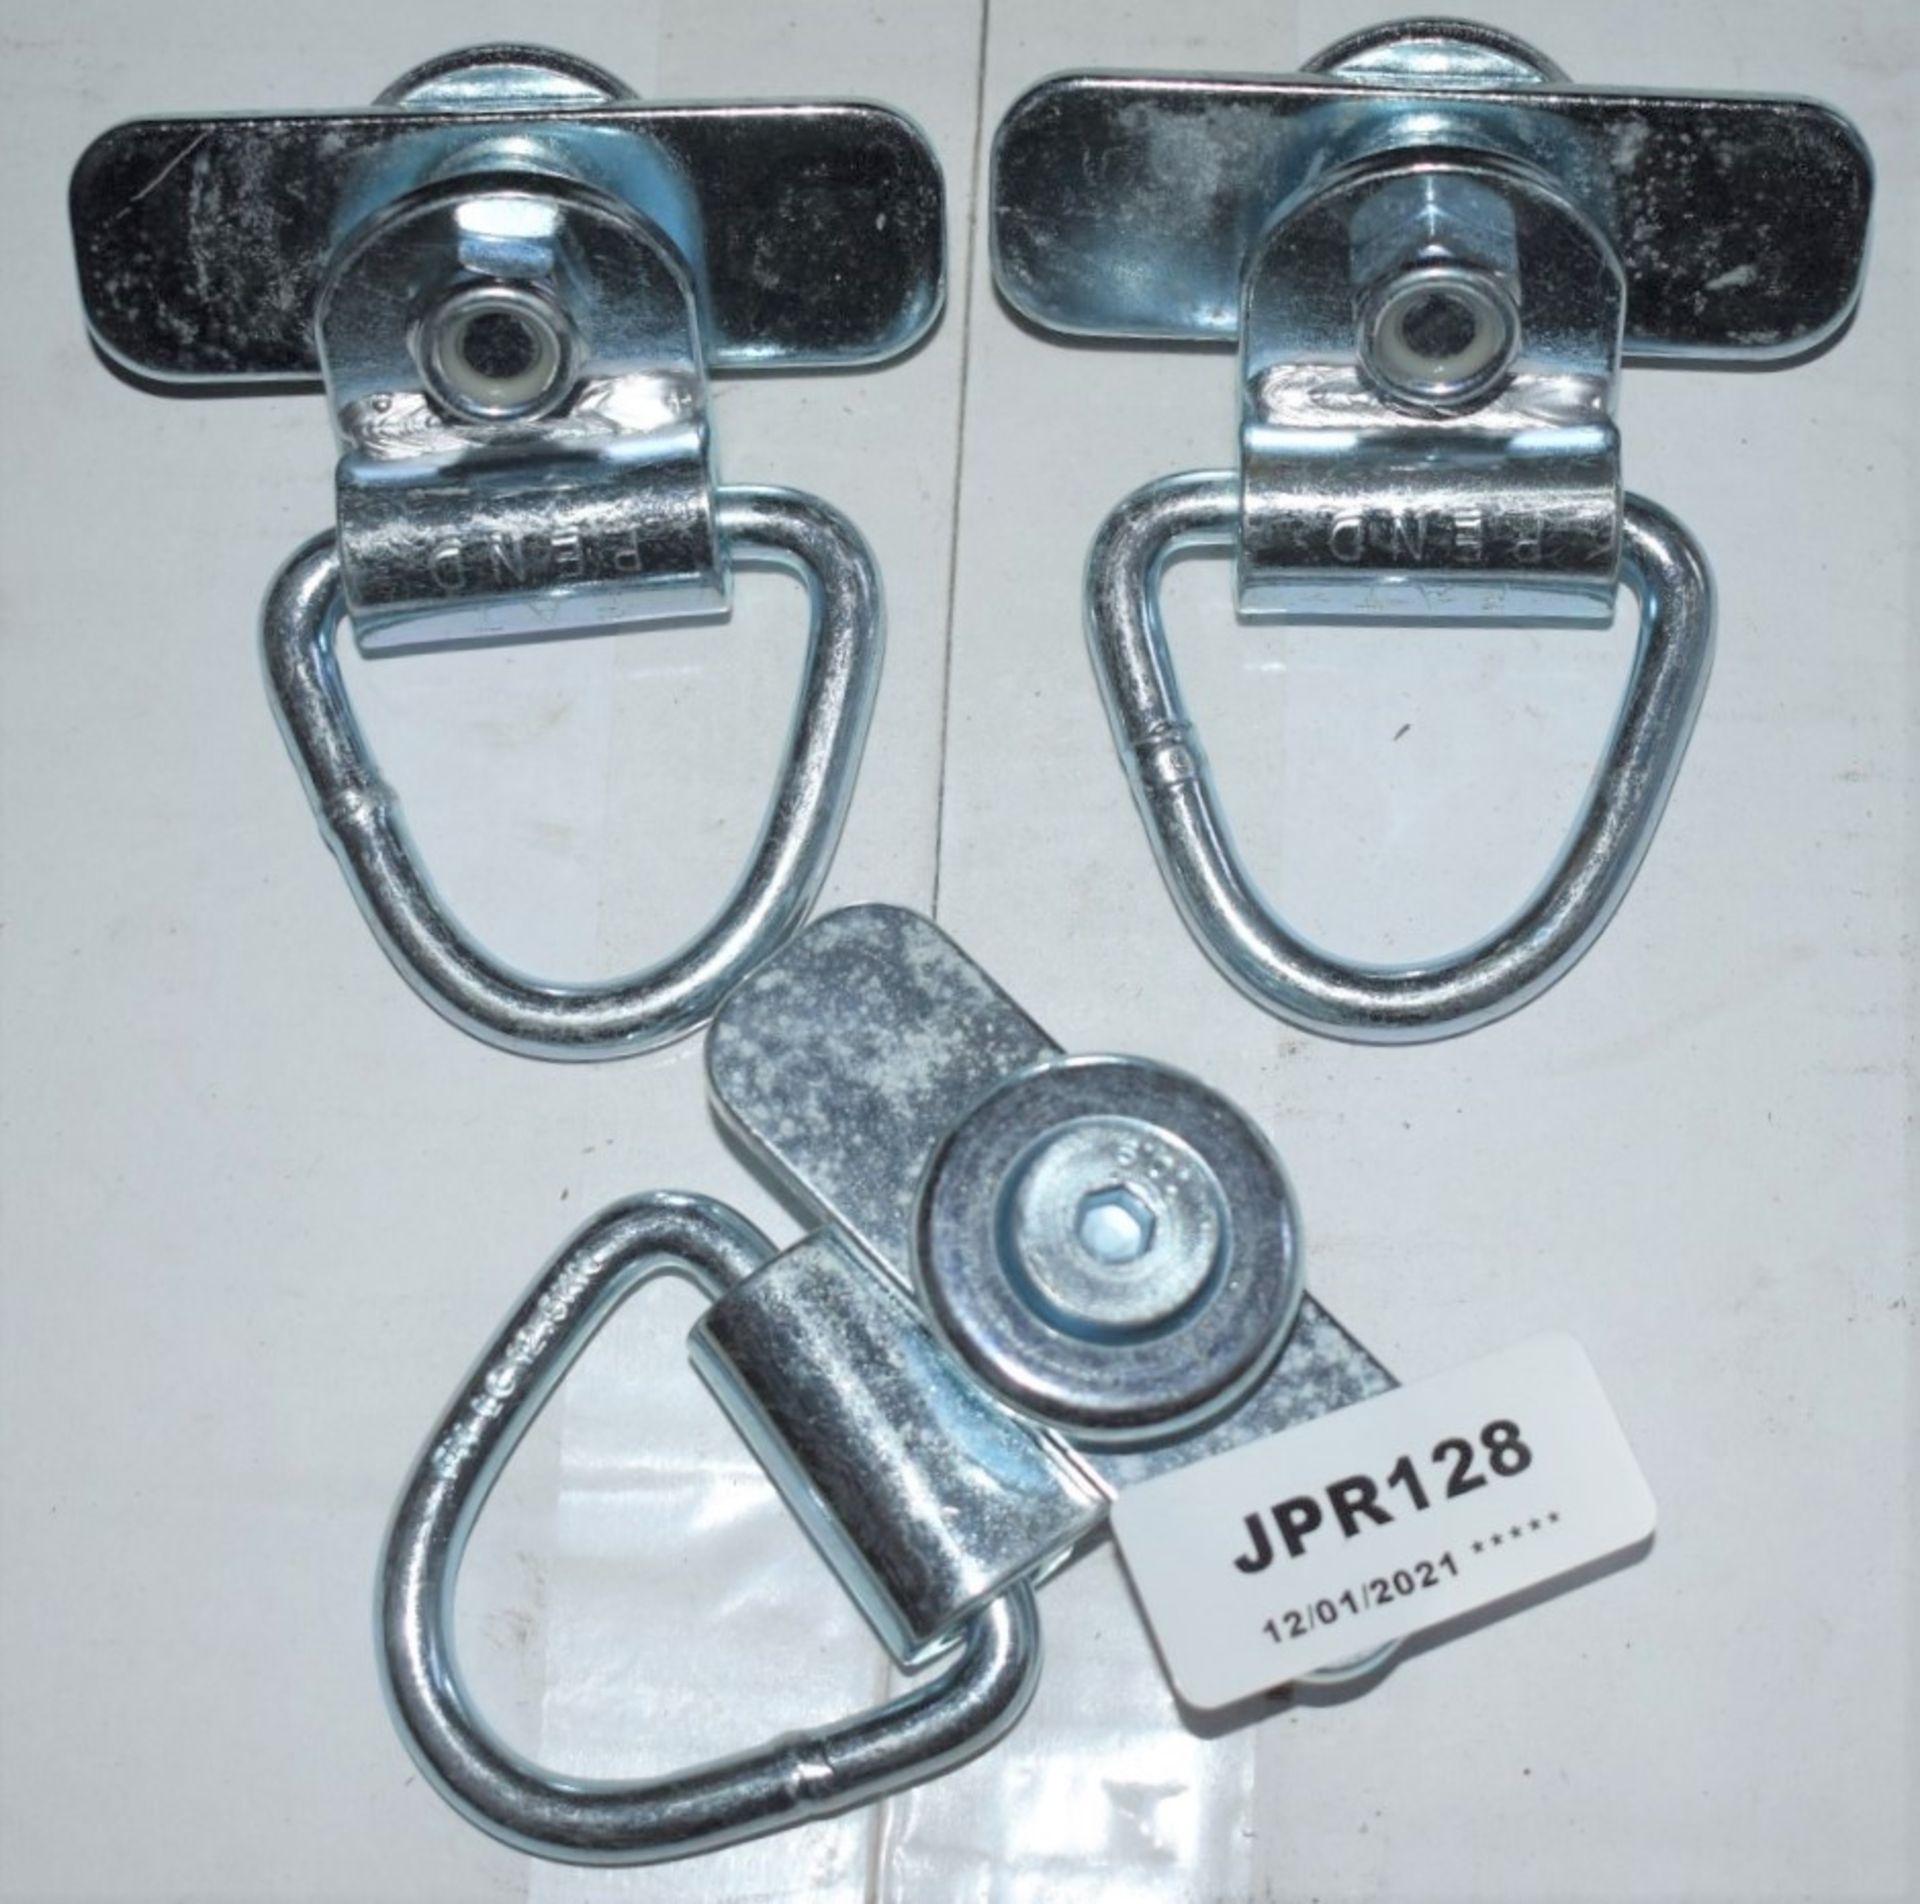 40 x Swivel D Ring Brackets For Truck Beds, Vans, Boats etc - Part No CS7 - New and Unused - CL622 - - Image 2 of 4